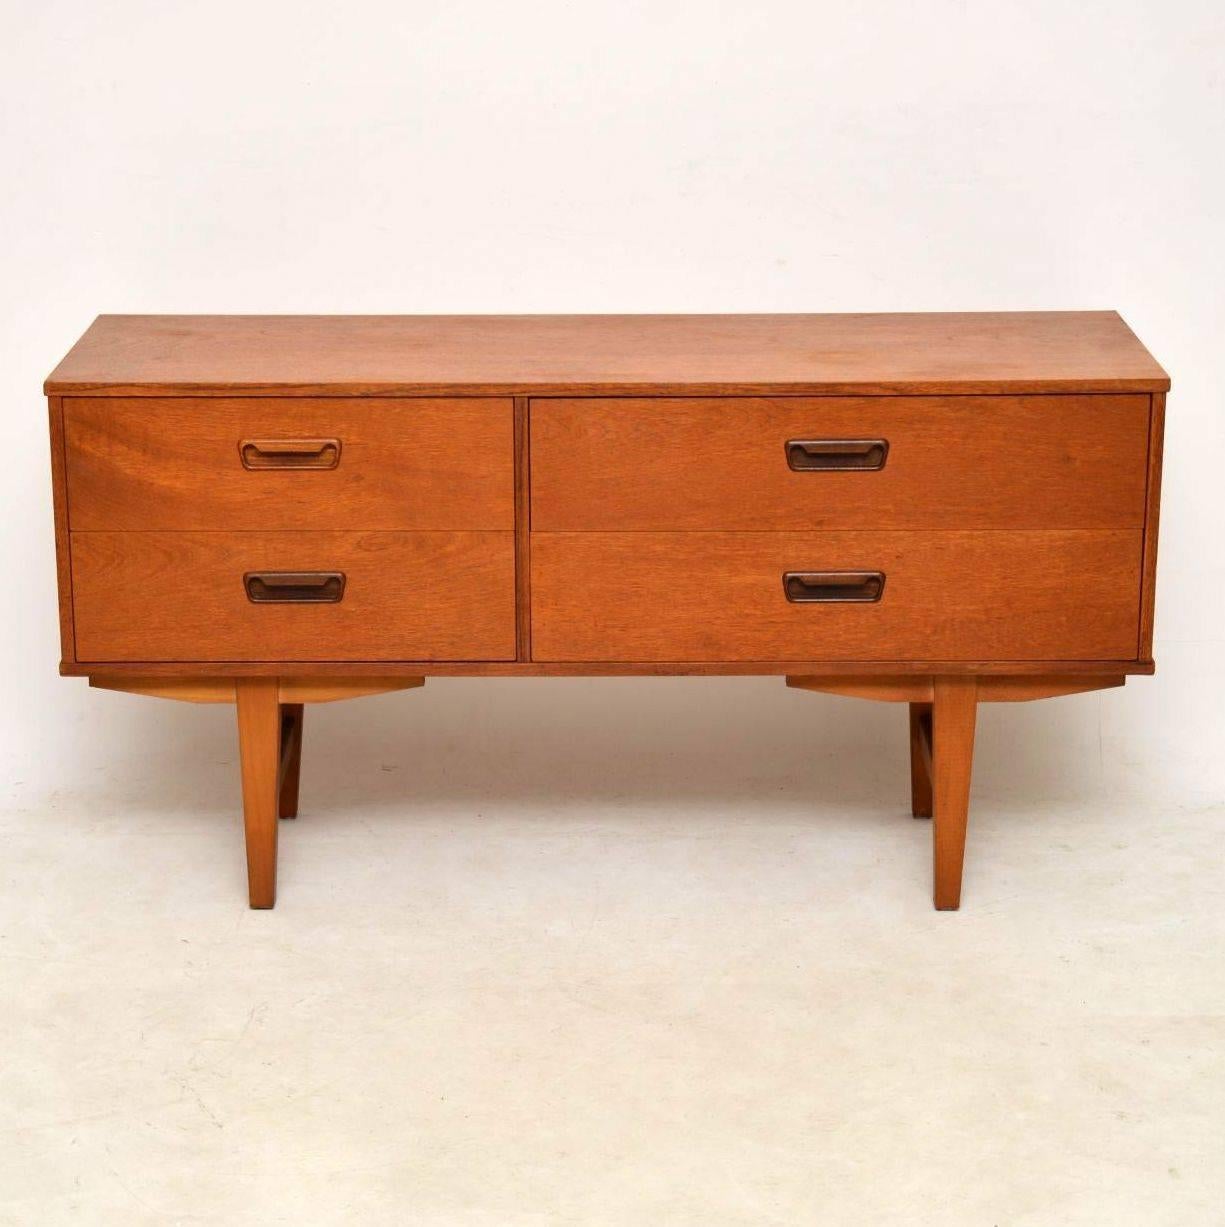 A stylish and petite vintage sideboard in teak, this dates from the 1960s. It’s very well made and is in excellent condition for its age, with only some extremely minor wear here and there.

Measure: Width – 129 cm
Depth – 40 cm
Height – 66 cm.